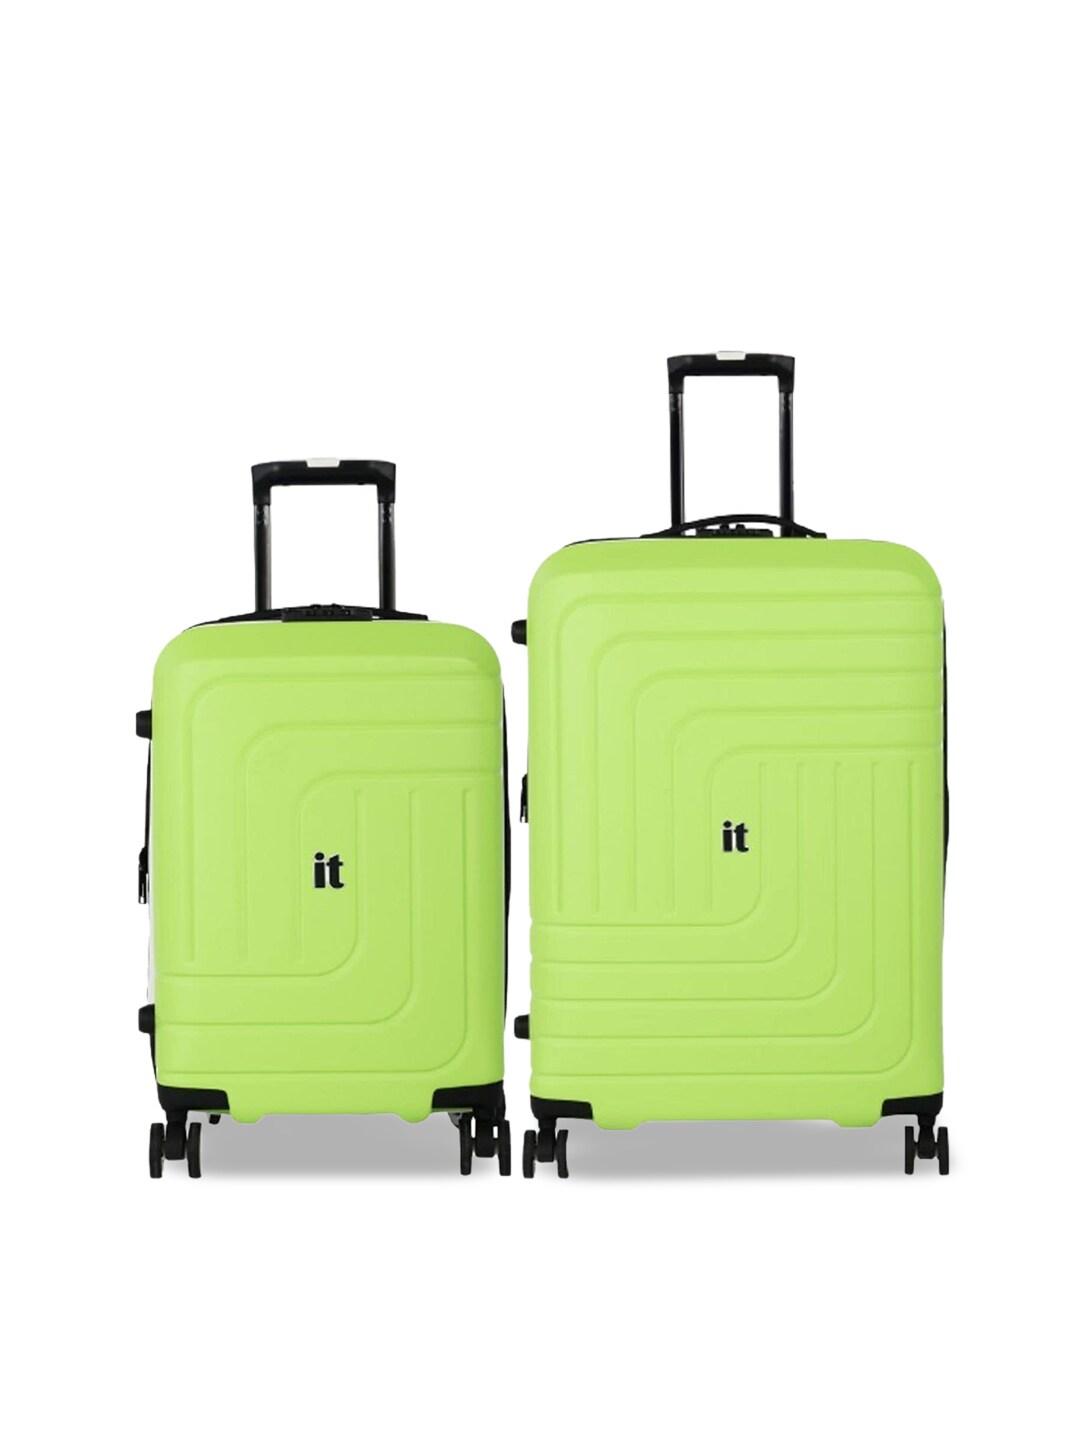 it luggage set of 2 convolved textured 24 inches hard-sided trolley suitcase